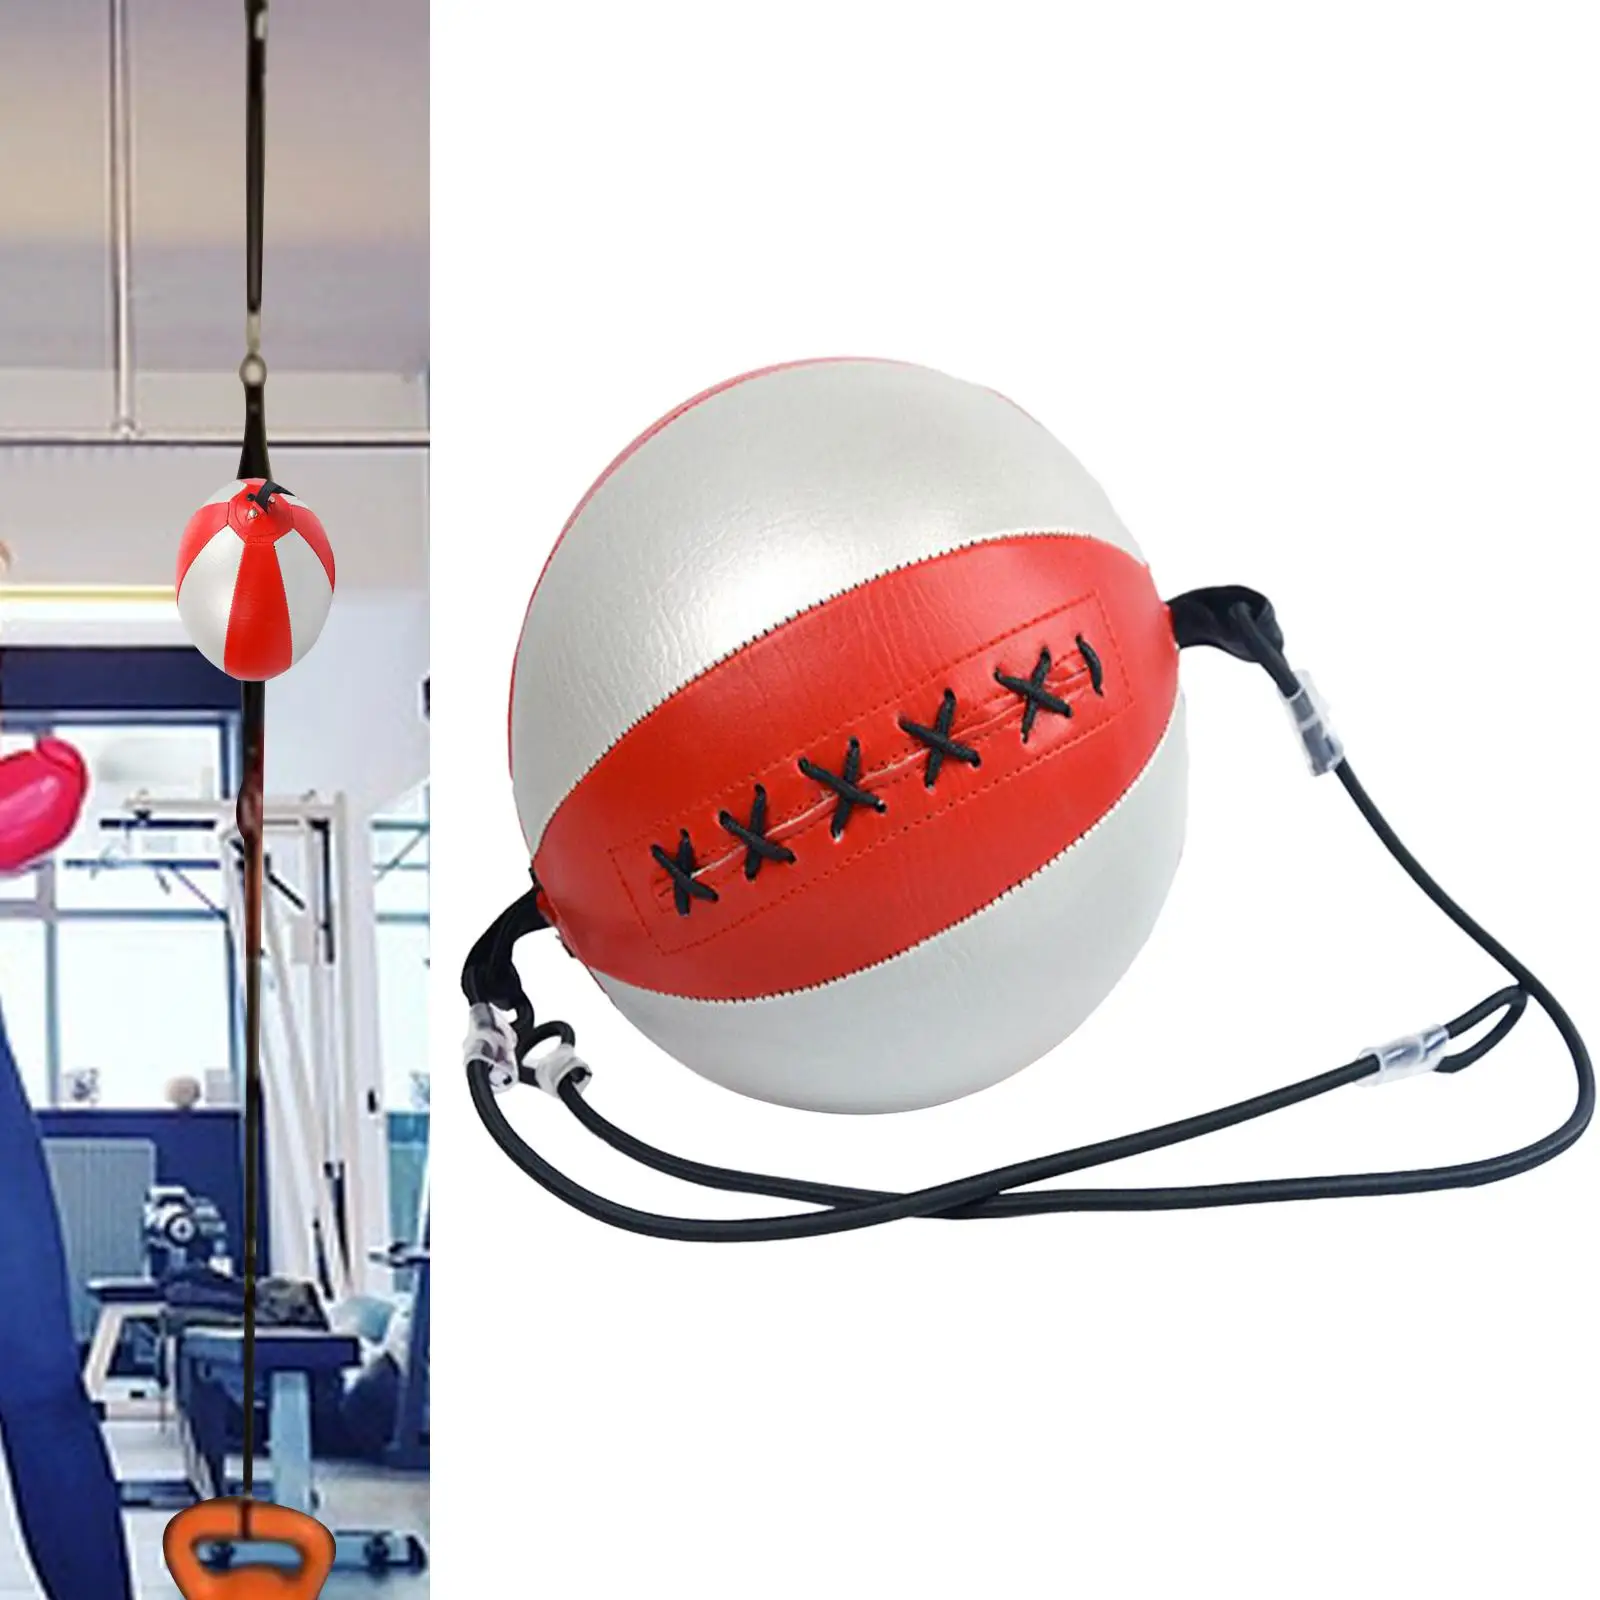 Boxing Speed Ball Punching Ball Premium Double End Bag Reaction Target for Workout, Home Gym, Training, Sparring